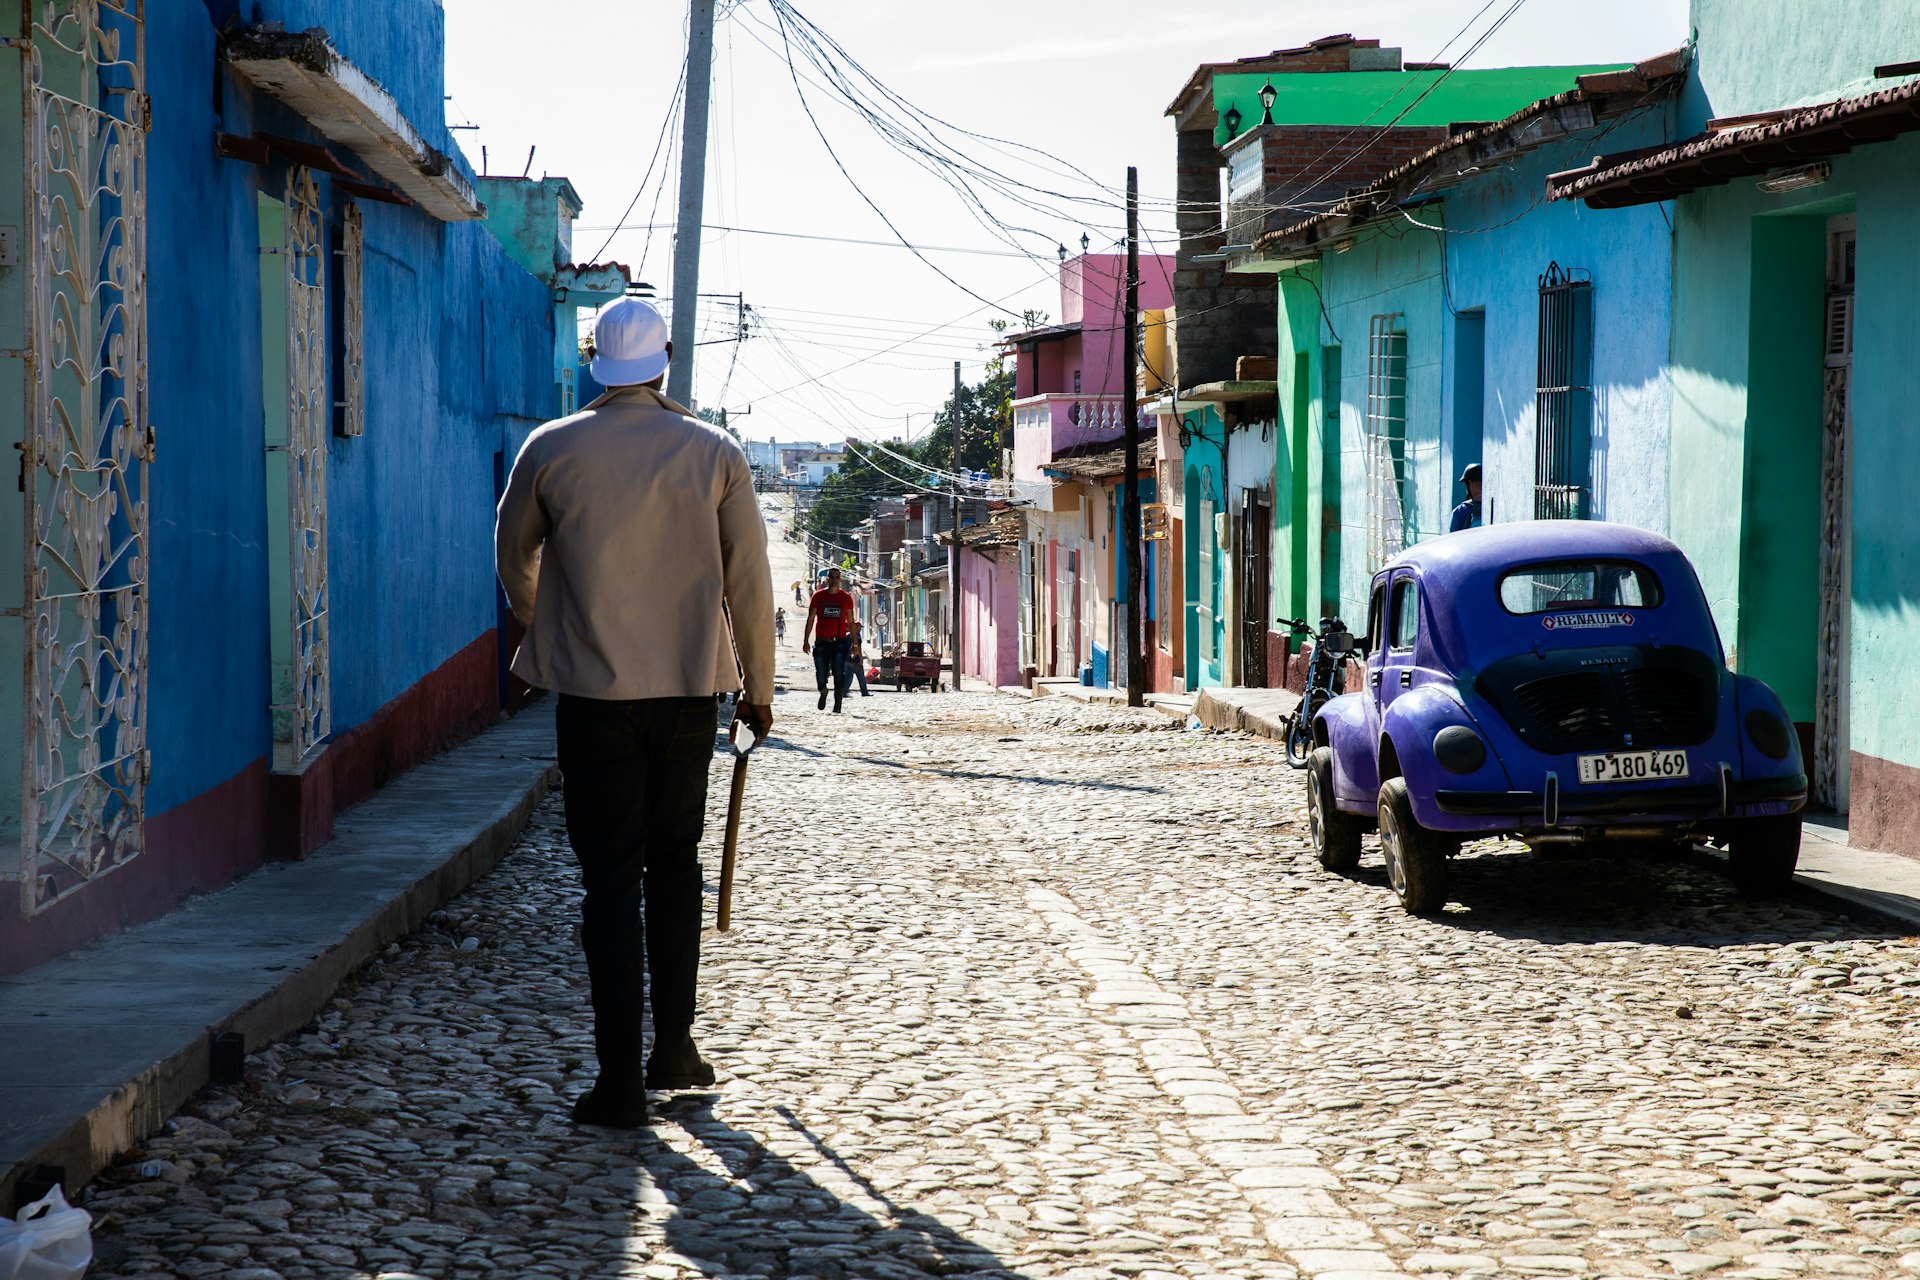 A man walks down a cobblestone street by colorful doorways and a purple Volkswagen Beetle in Trinidad, Cuba